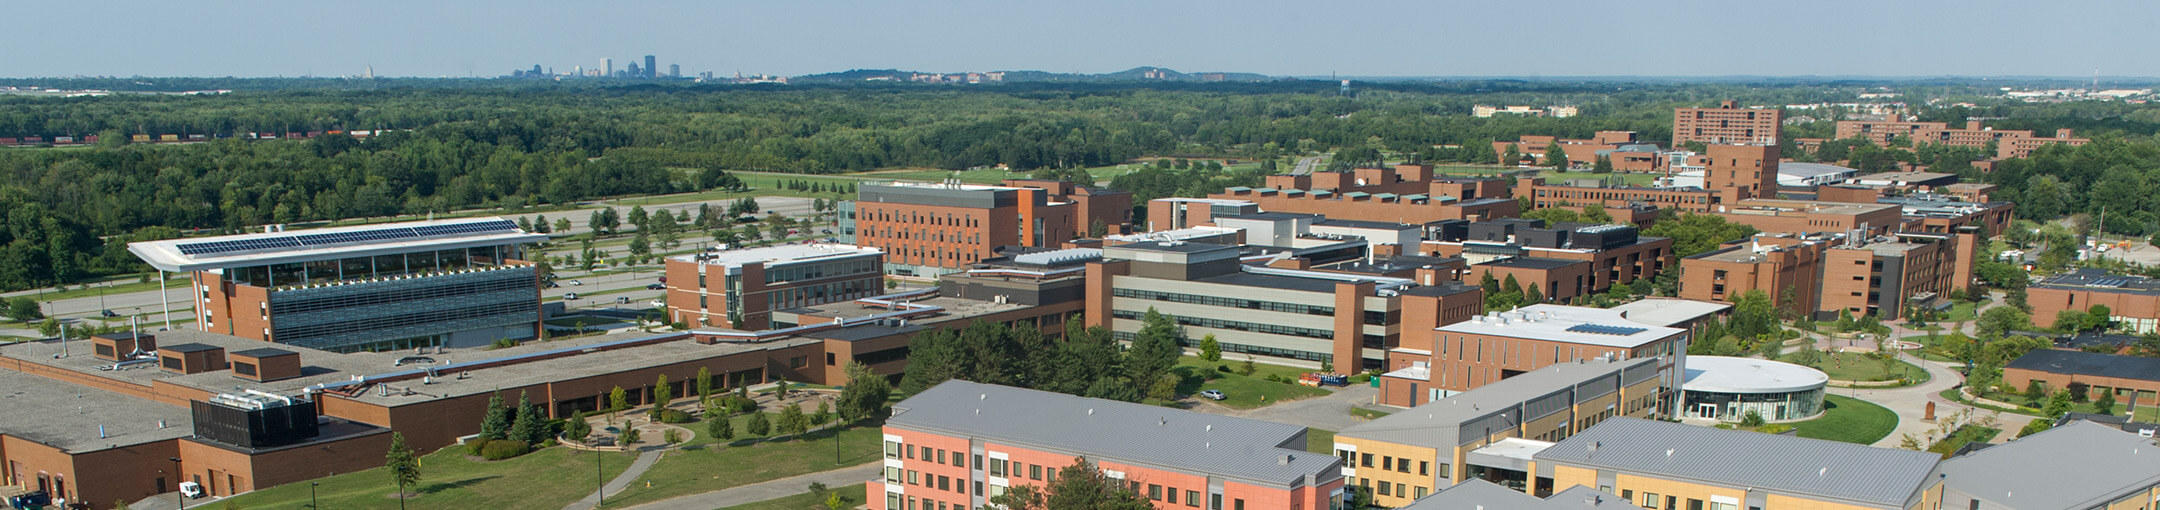 Aerial view of the R I T campus